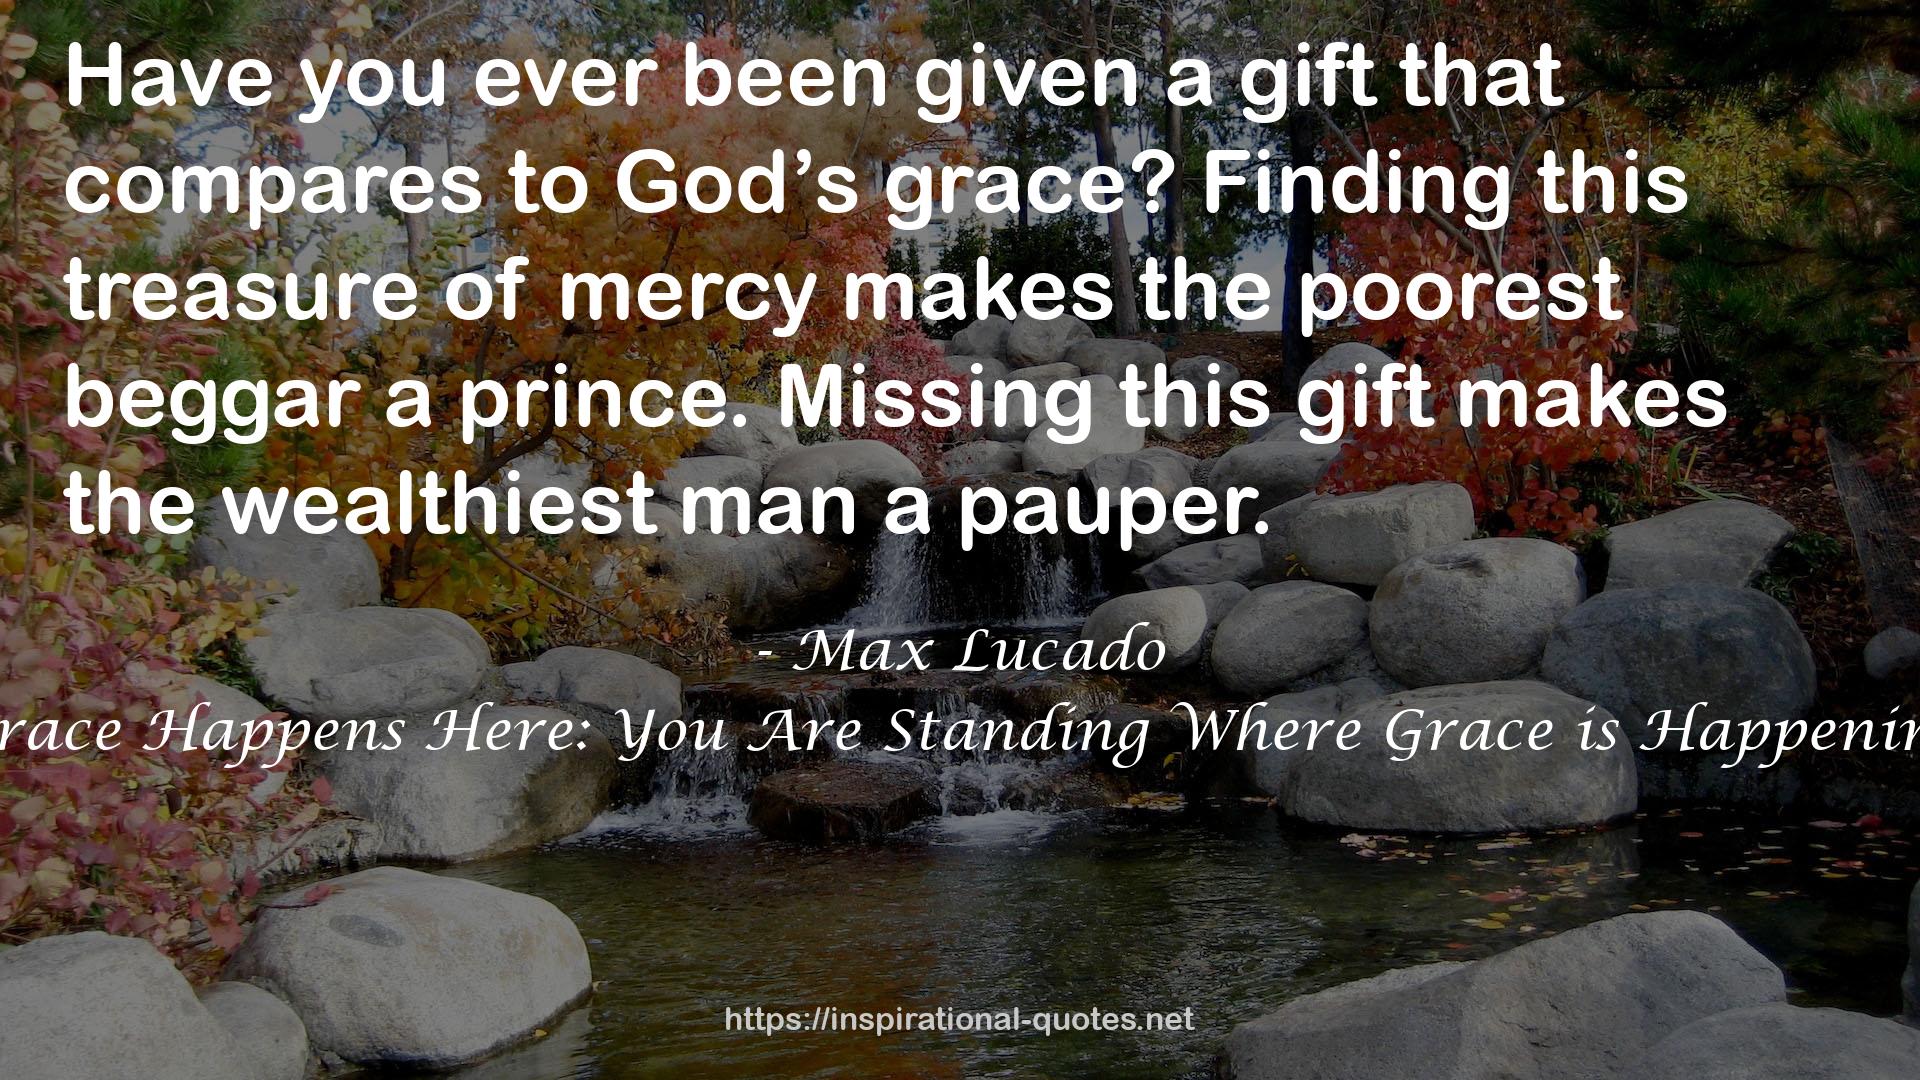 Grace Happens Here: You Are Standing Where Grace is Happening QUOTES